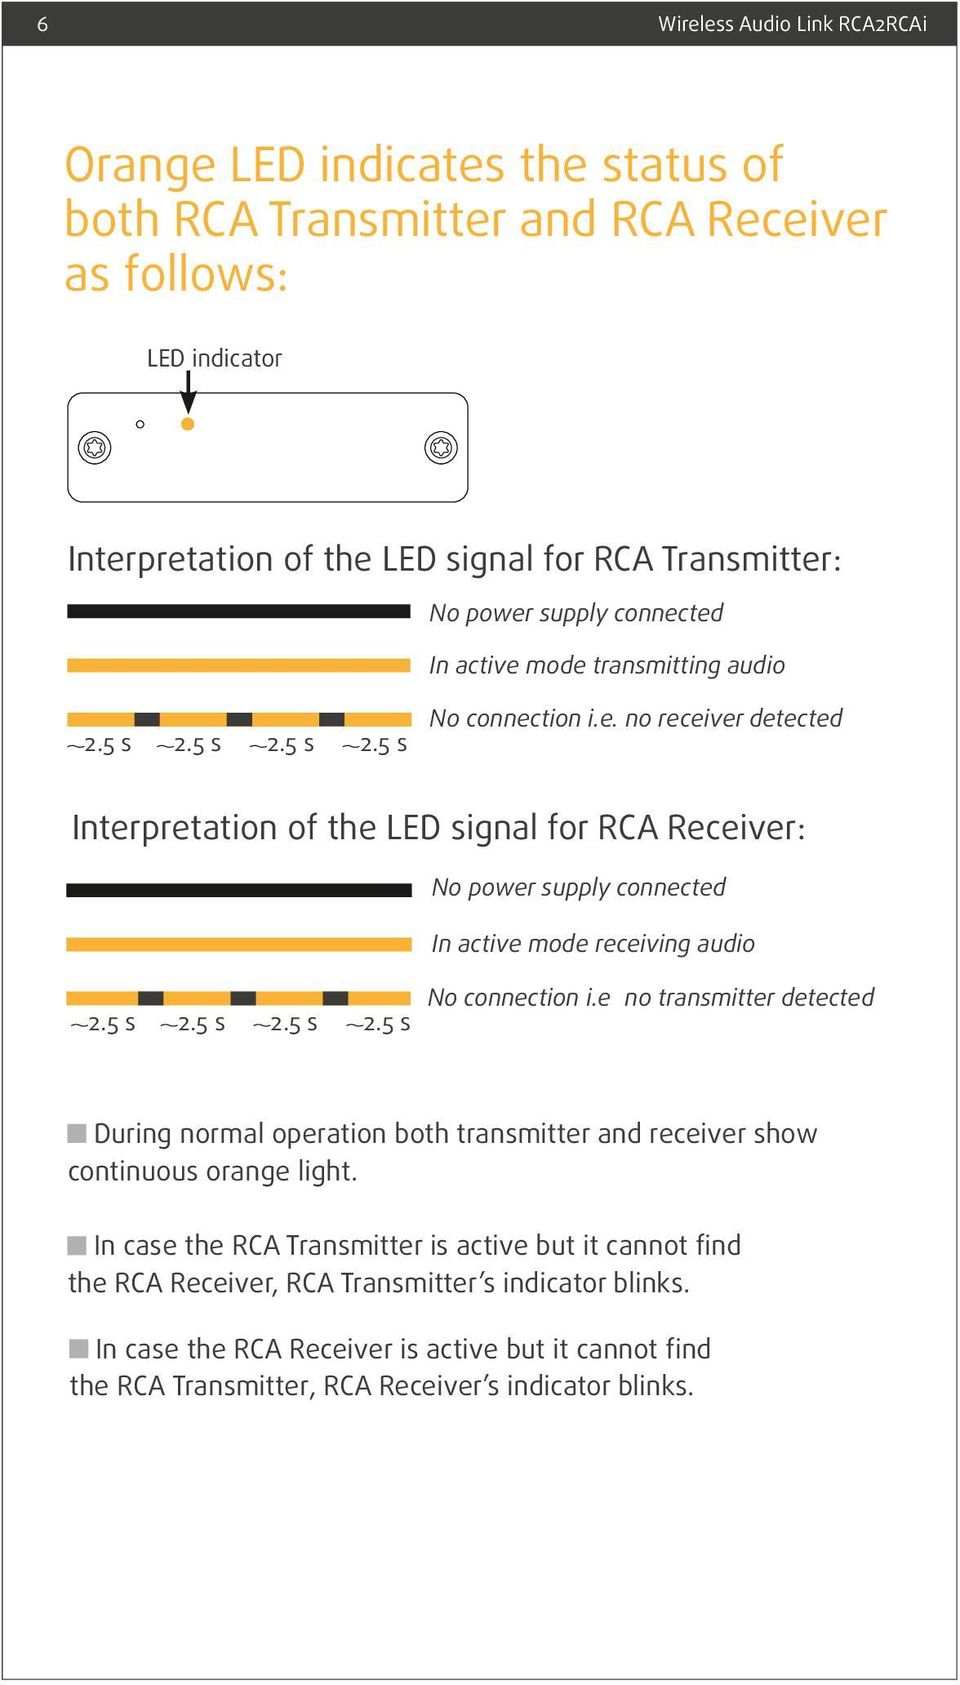 e no transmitter detected During normal operation both transmitter and receiver show continuous orange light.